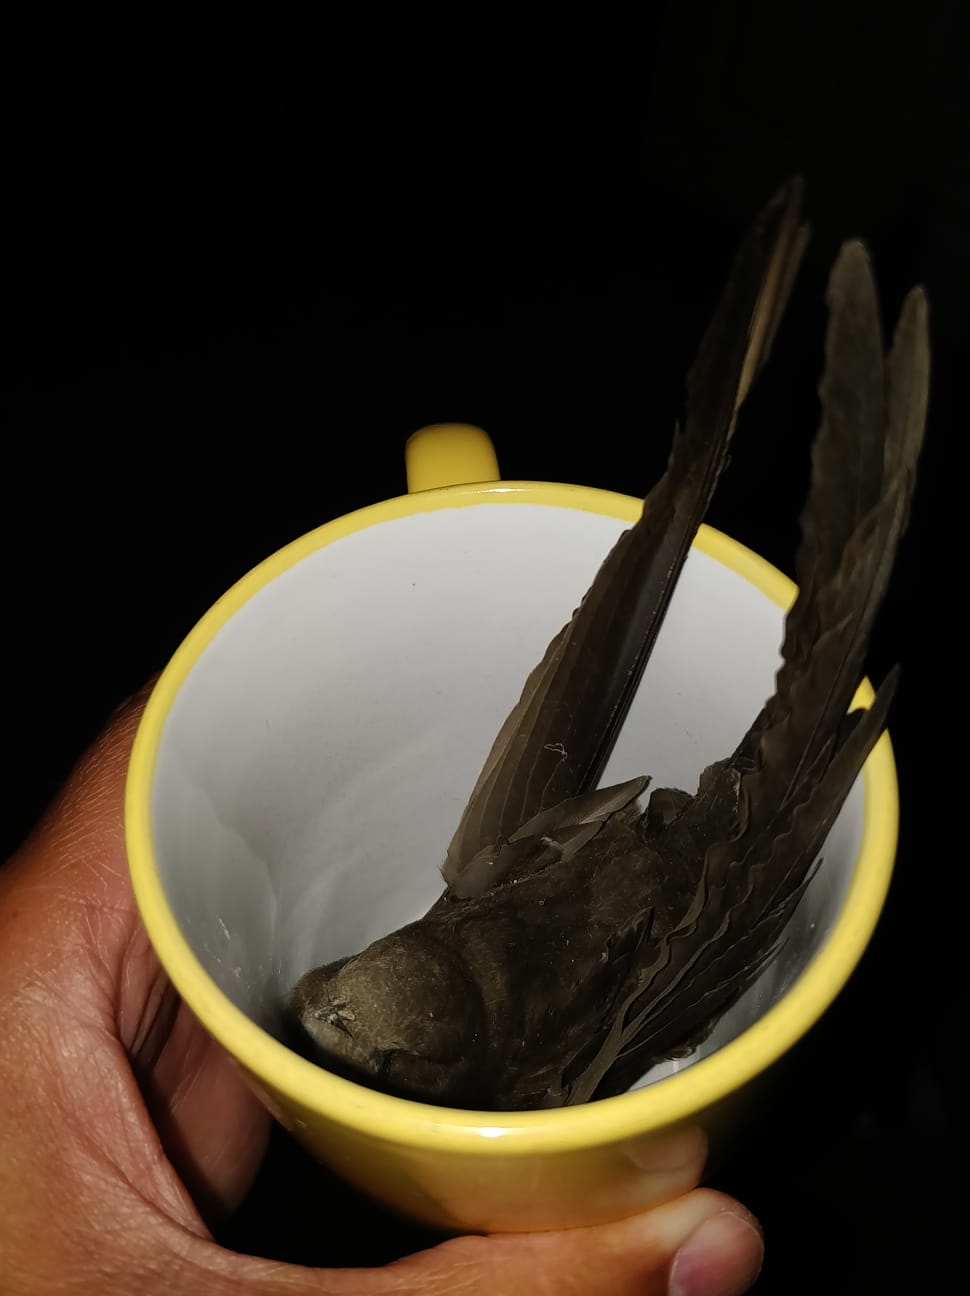 The swift was found inside a cup and when removed 